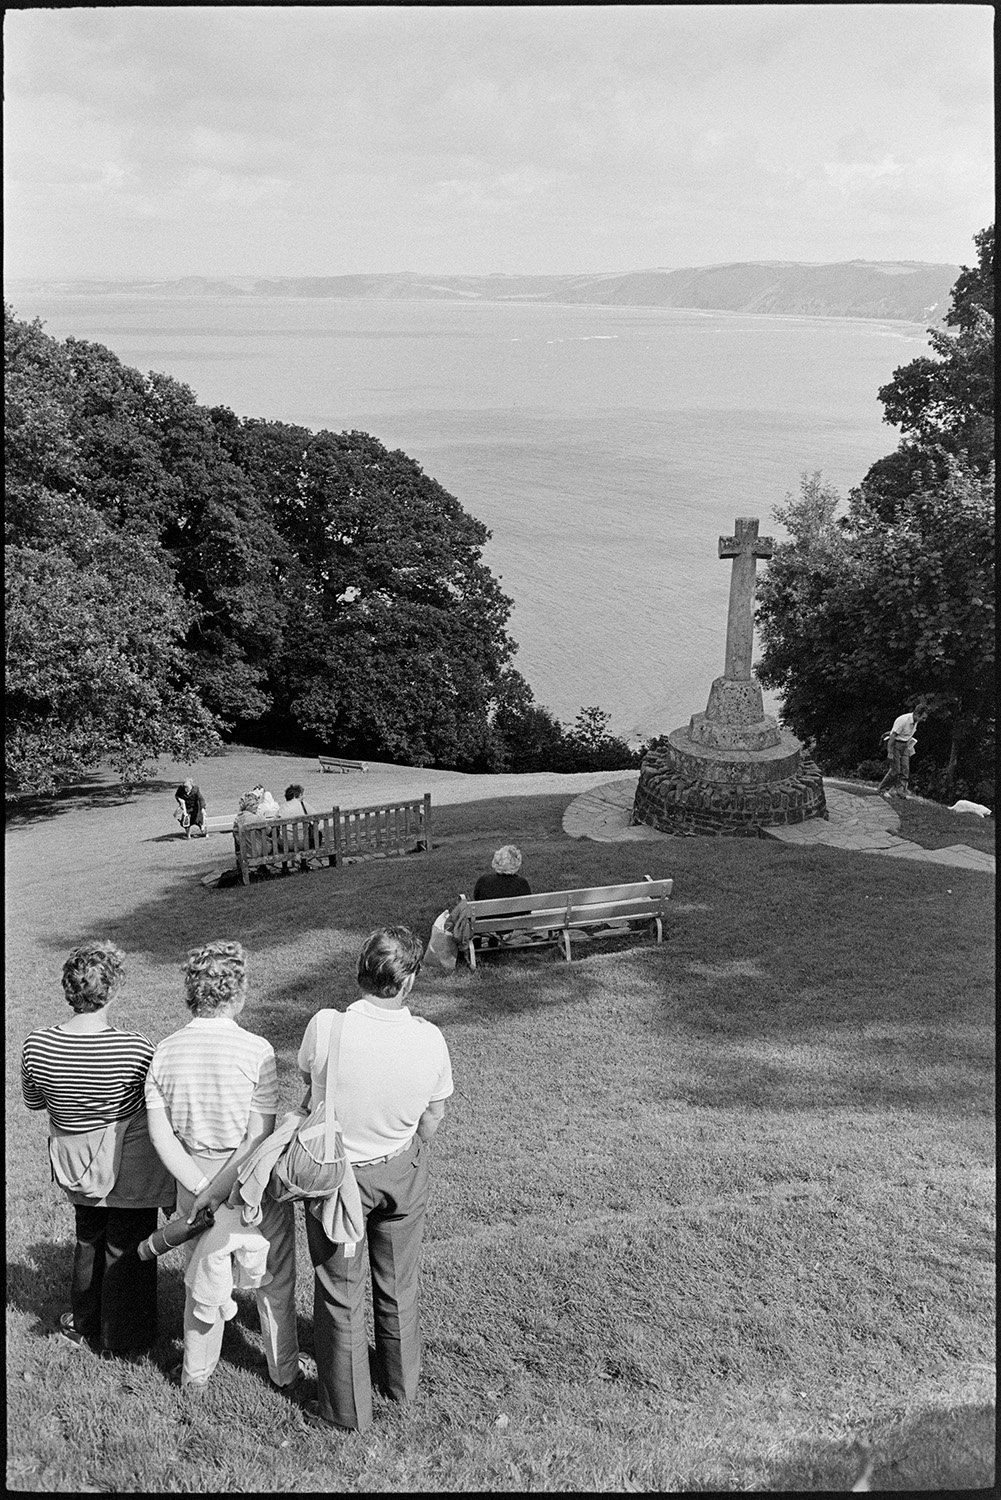 Holidaymakers sitting in park above sea looking at view of bay and coast, stone cross. 
[Holidaymakers sitting on a bench and standing on the grass in a park overlooking the sea and bay at Clovelly. The war memorial for the village can be seen in the park.]